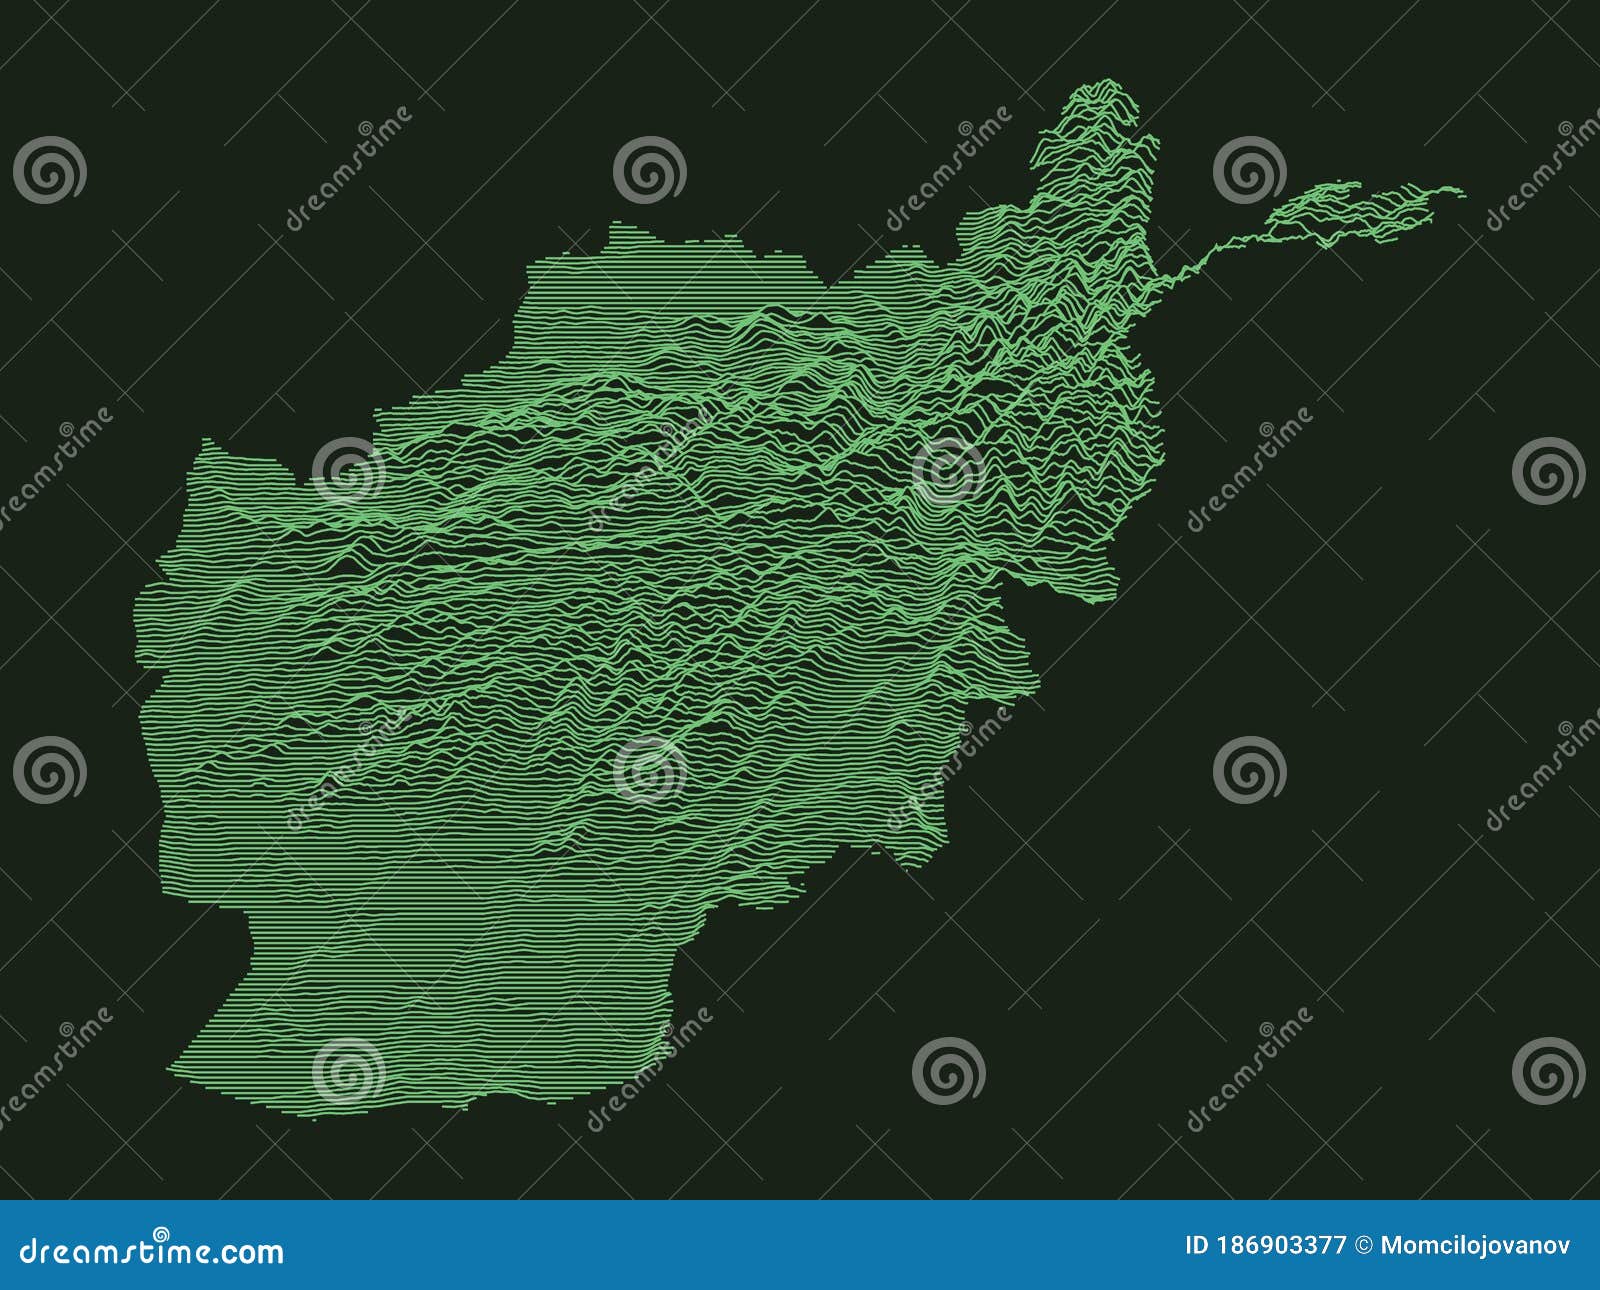 Relief Map Of Afghanistan Stock Vector Illustration Of Turkmen 186903377